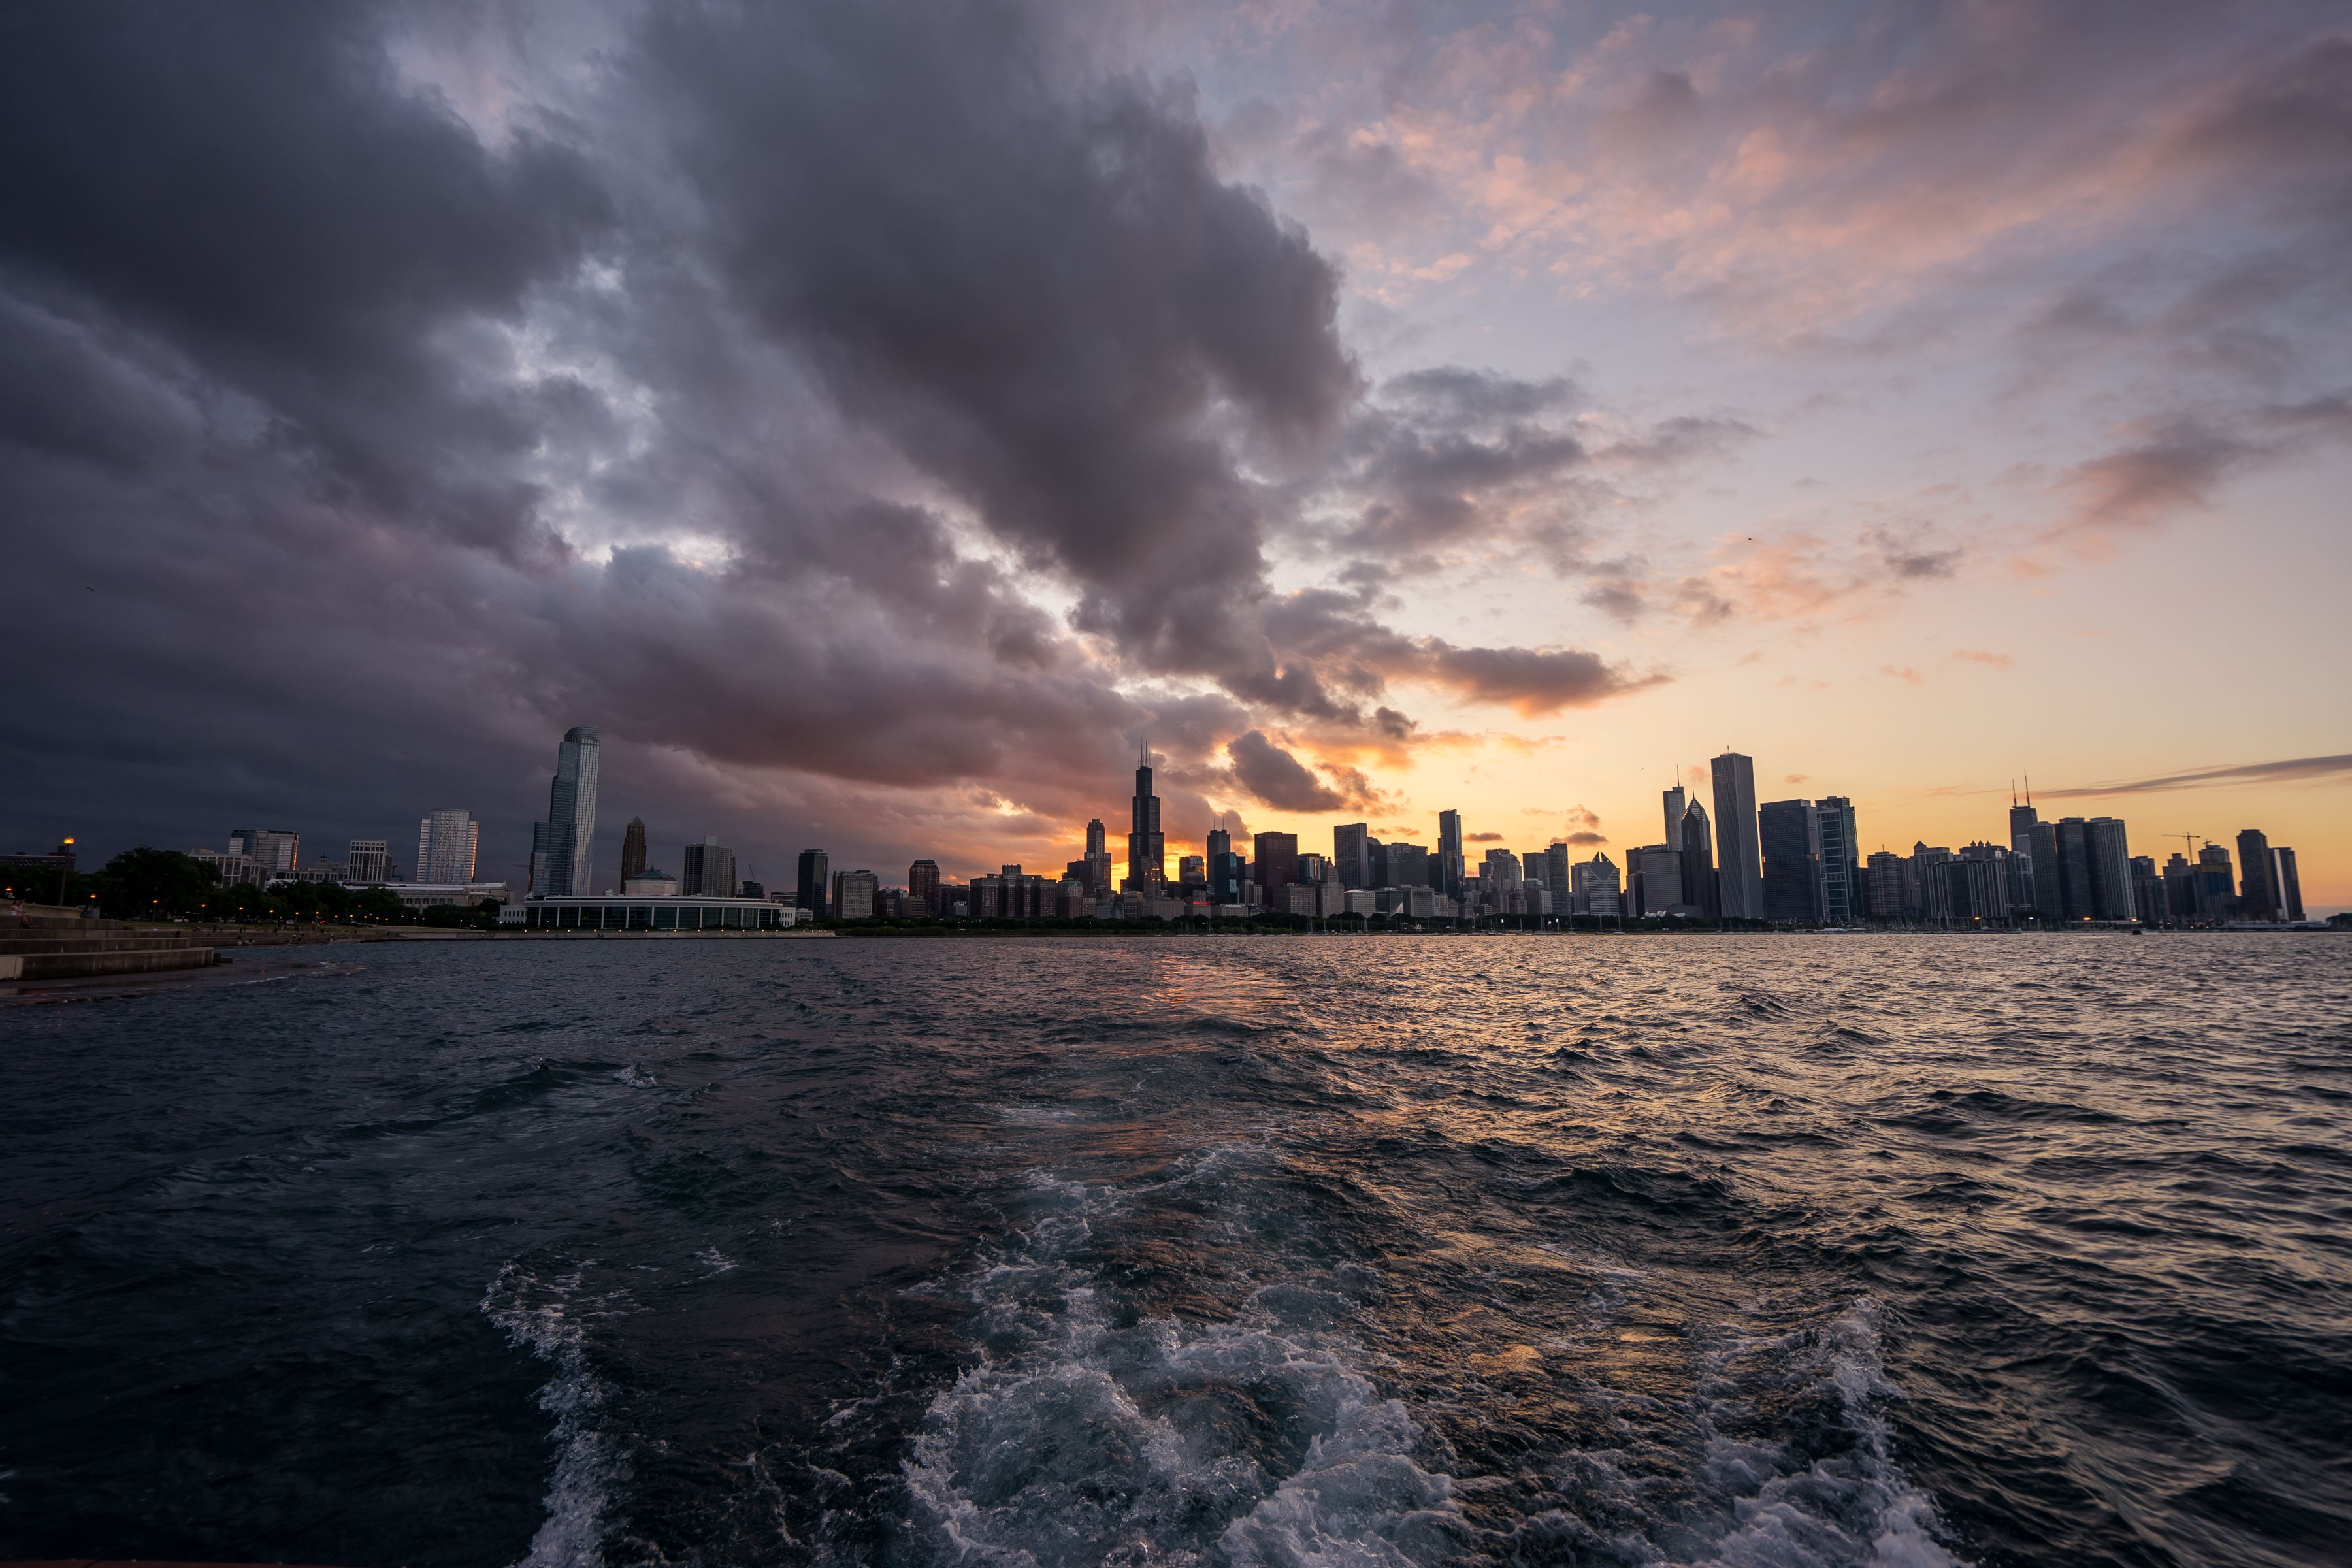 Tatyana Perreault captures the ever-changing Chicago skyline in her photography